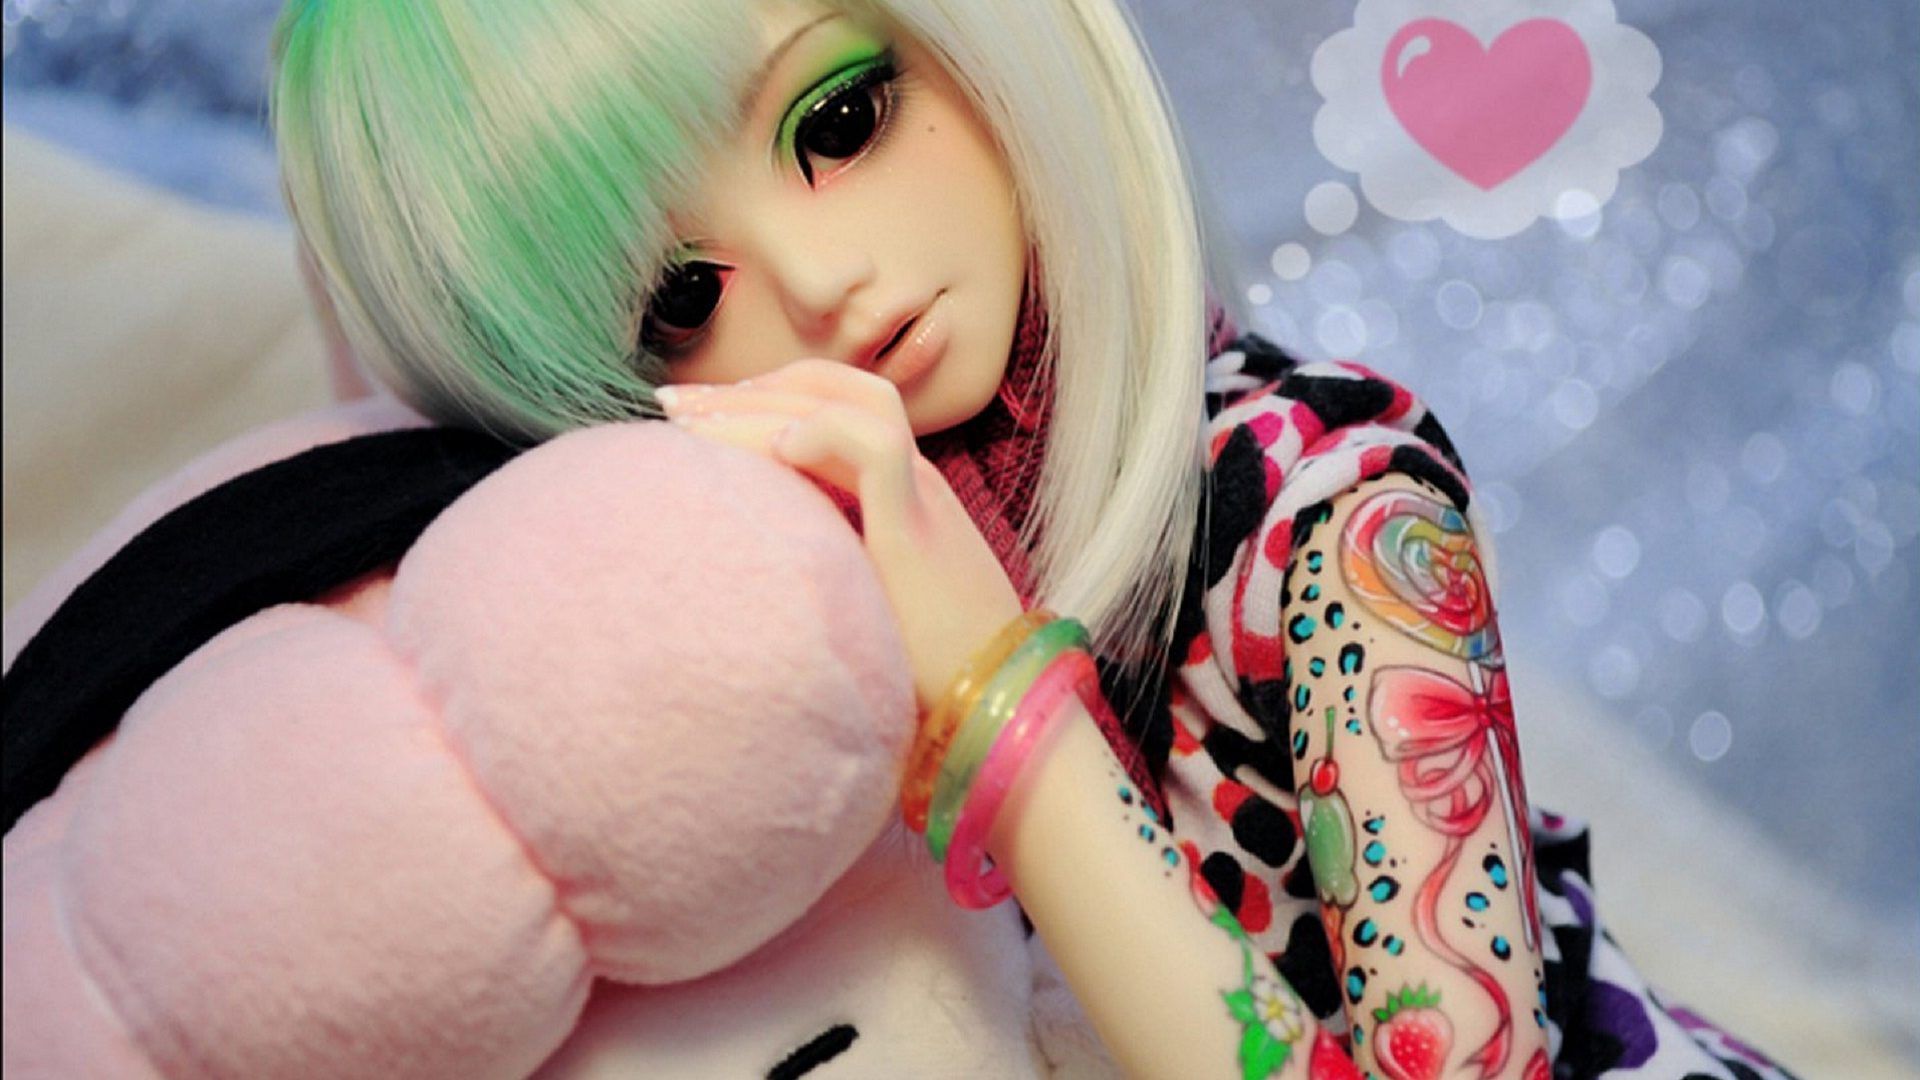 Toy Doll Innocent And Sad Looks With Teddy Bear Image Wallpaper